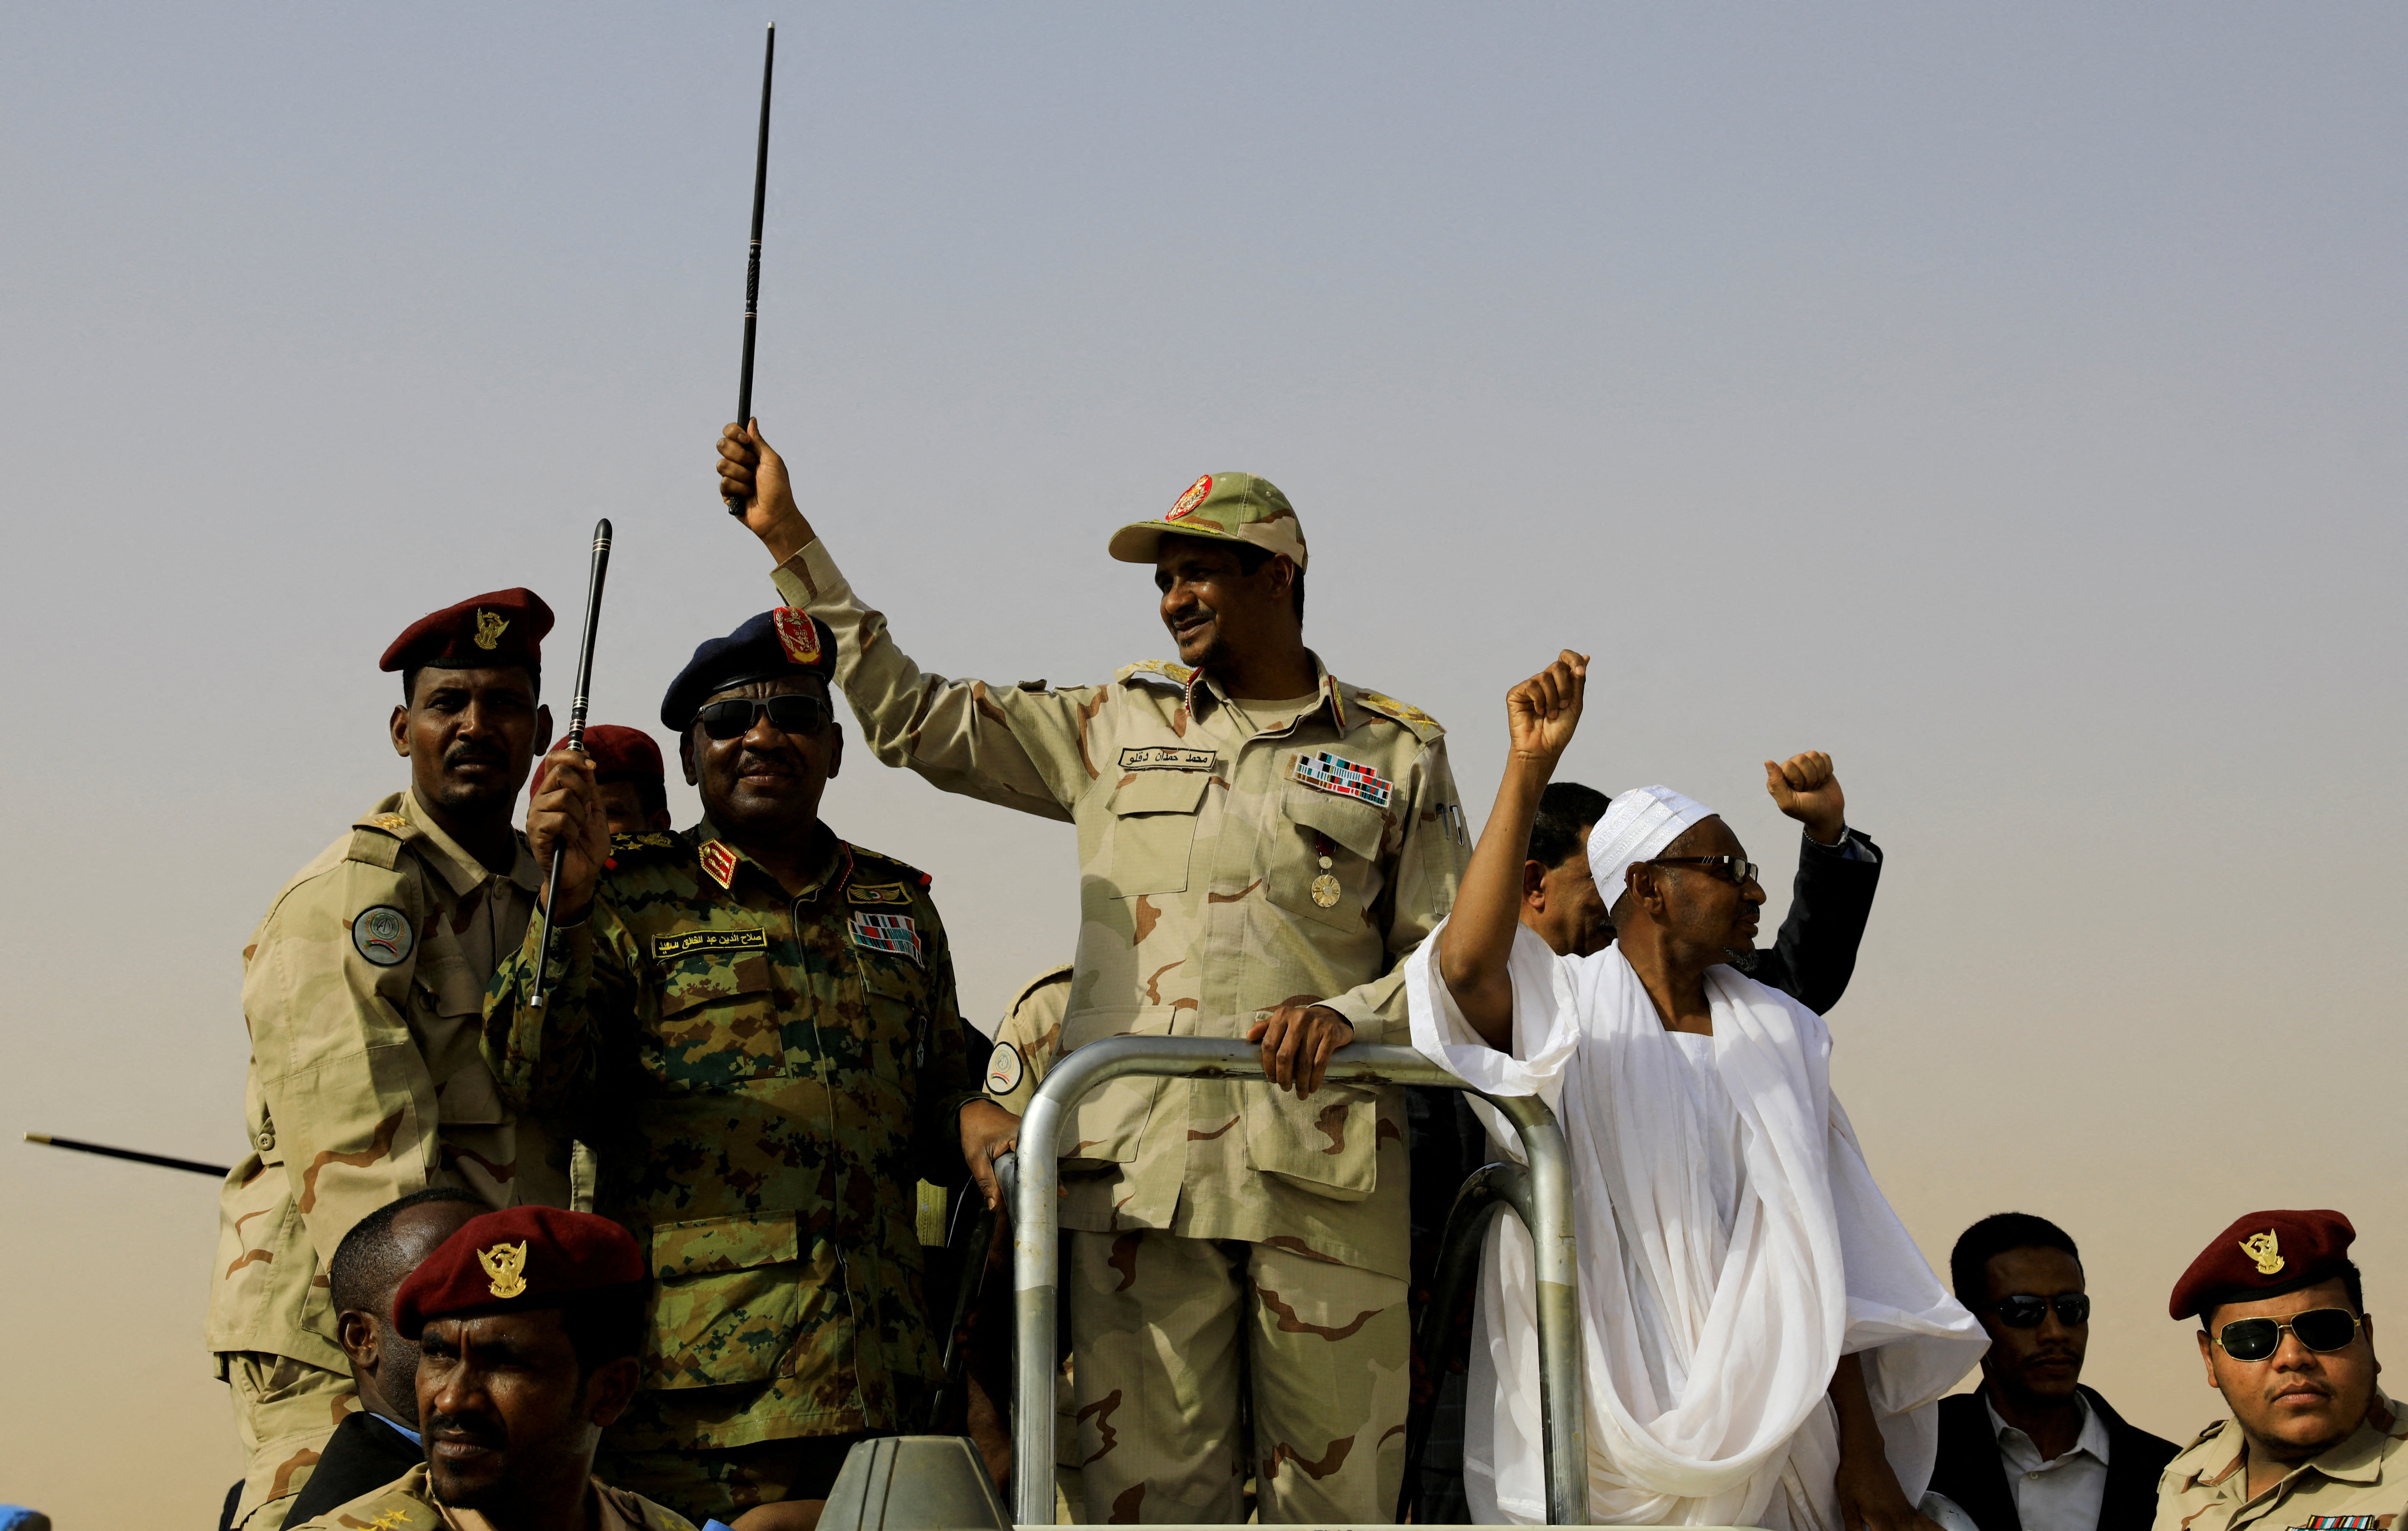 Lieutenant General Mohamed Hamdan Dagalo greets his supporters as he arrives at a meeting in Aprag village